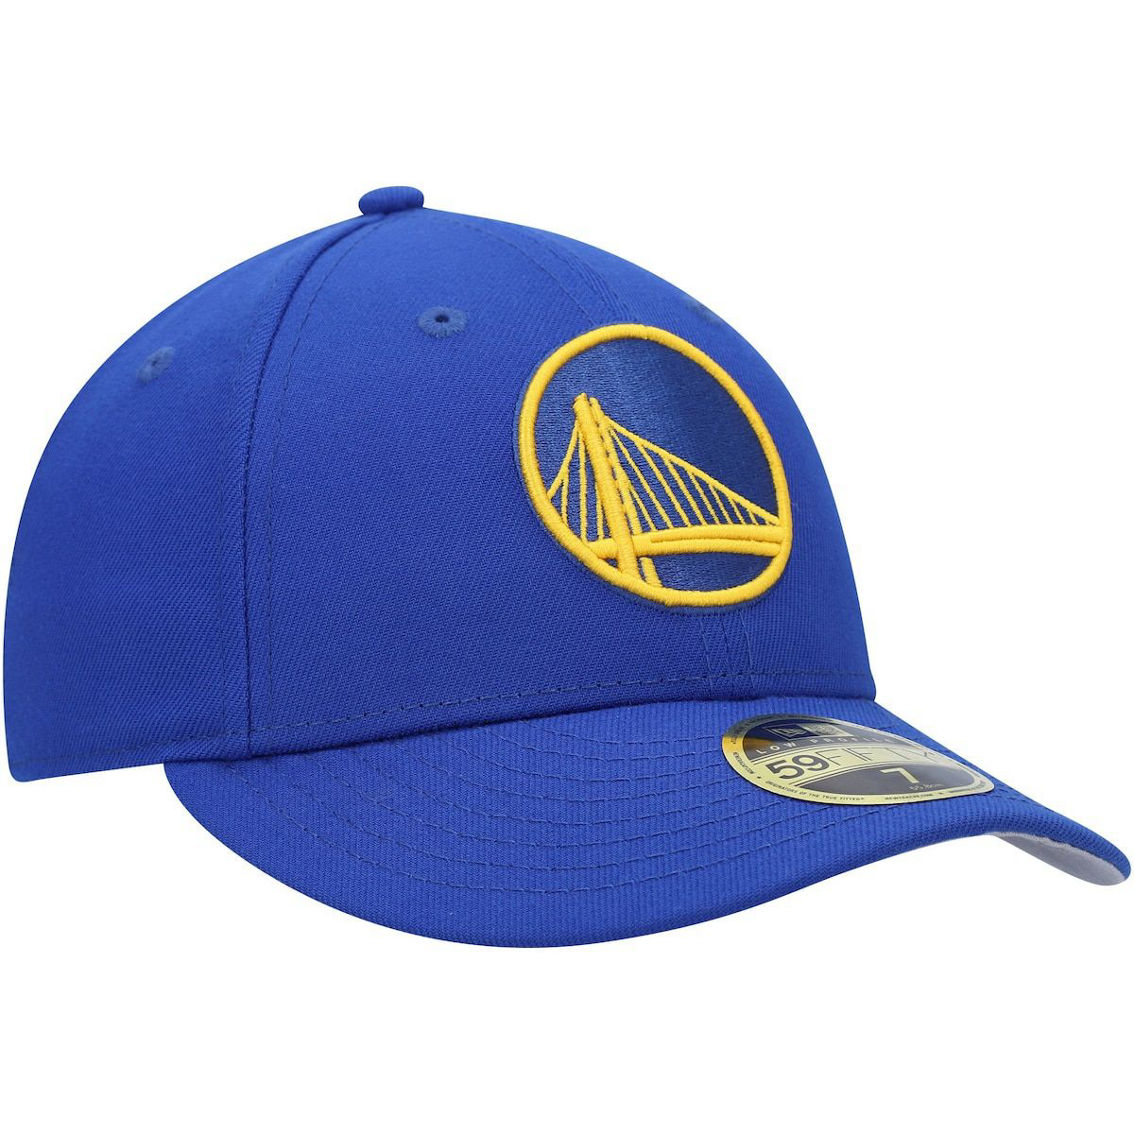 New Era Men's Royal Golden State Warriors Team Low 59FIFTY Fitted Hat - Image 4 of 4